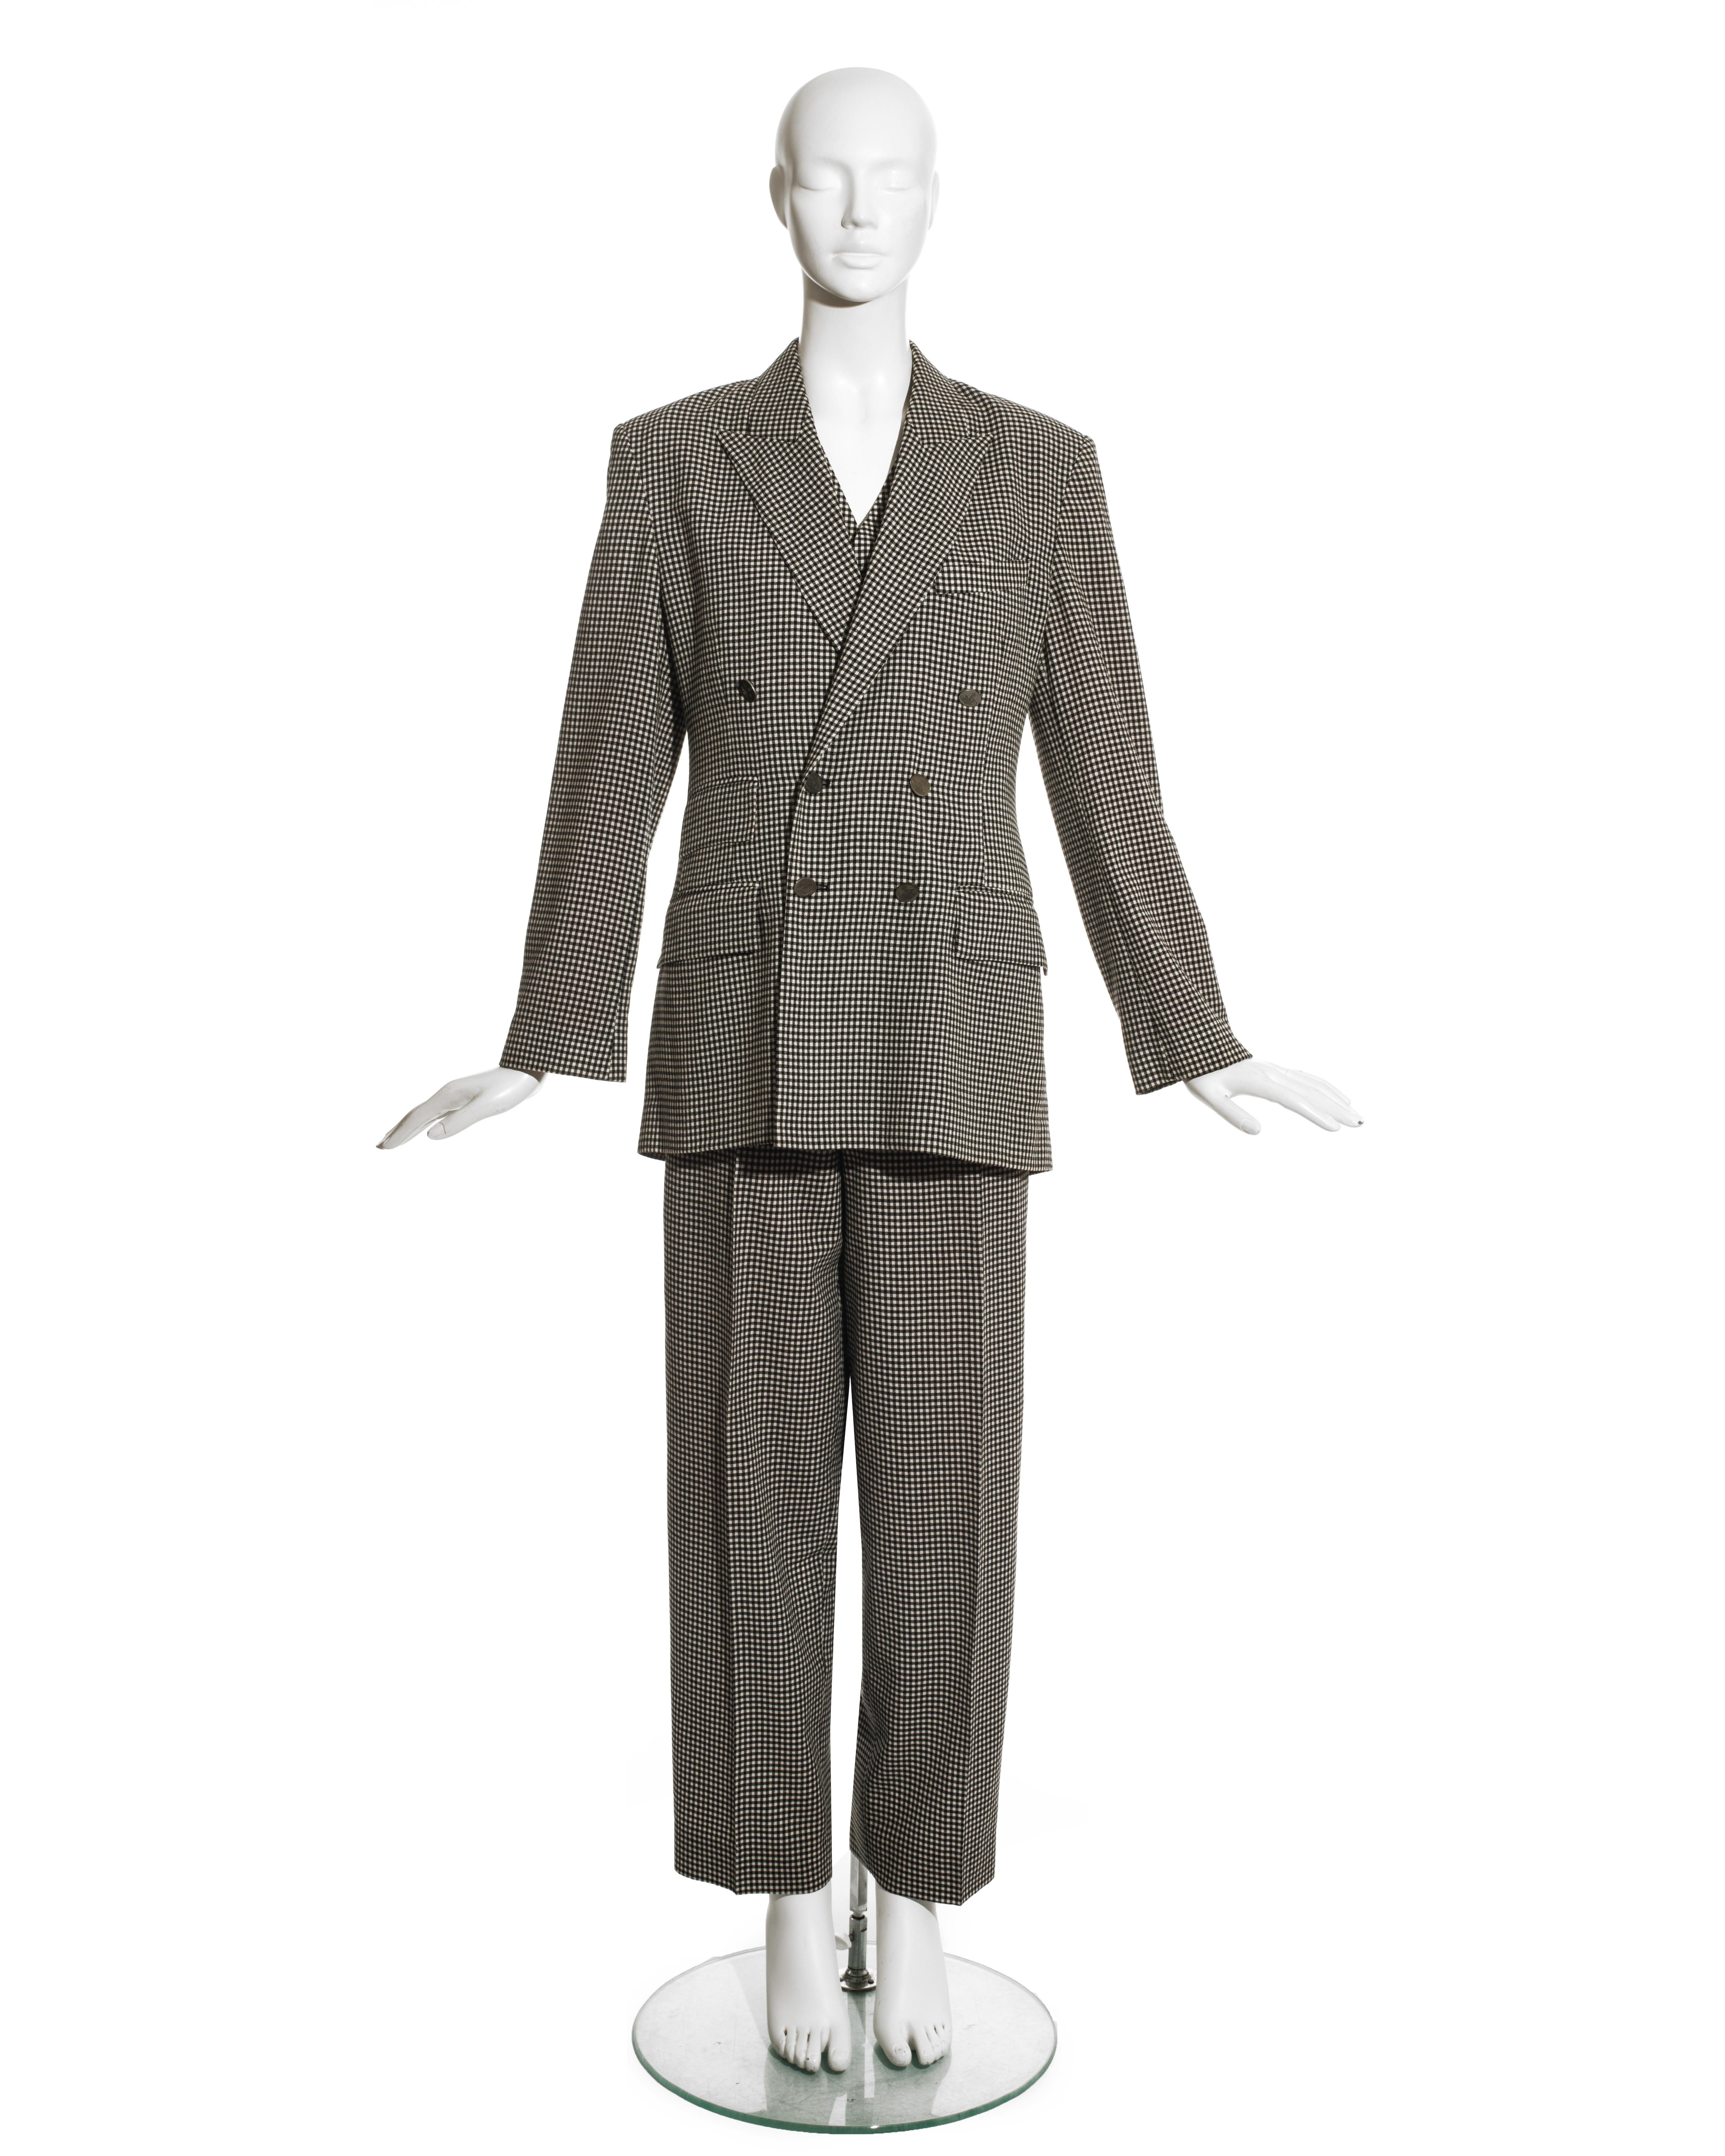 Vivienne Westwood unisex black and white checked wool three-piece pant suit comprising: double-breasted blazer jacket with peak lapels, silver orb buttons and red satin lining, single-breasted waistcoat and high-waisted carrot pants. 

Fall-Winter